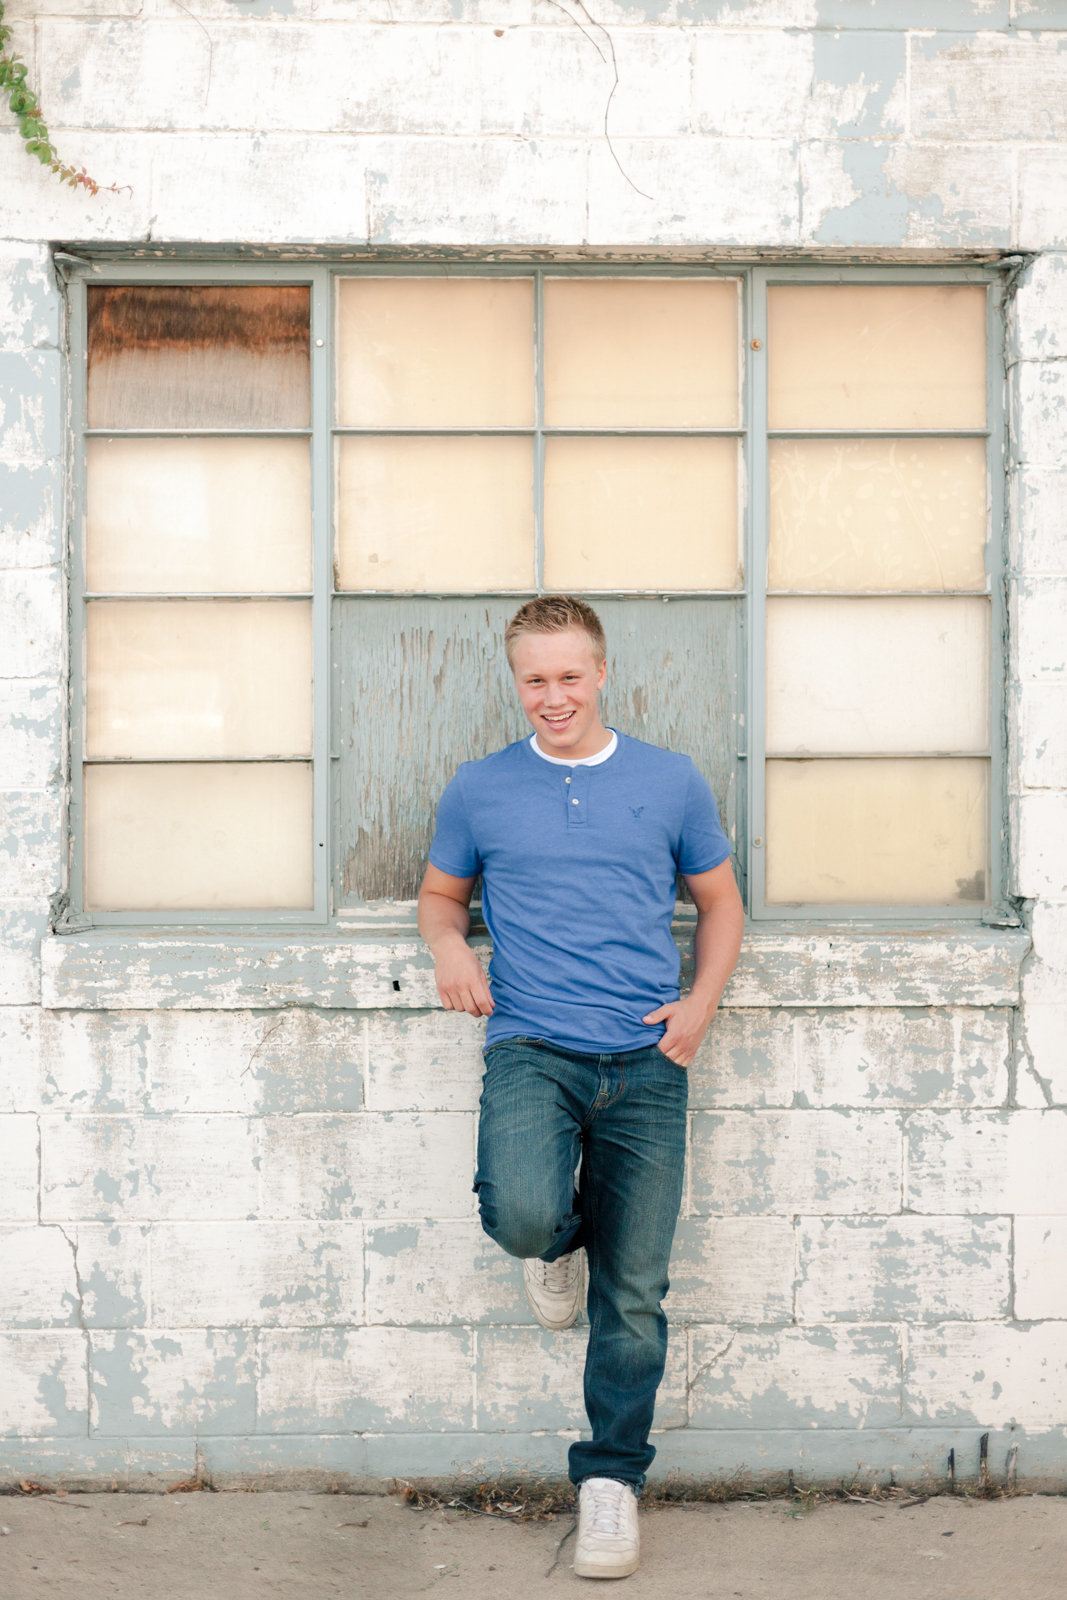 senior guy leans against rustic industrial building chipped paint and windows